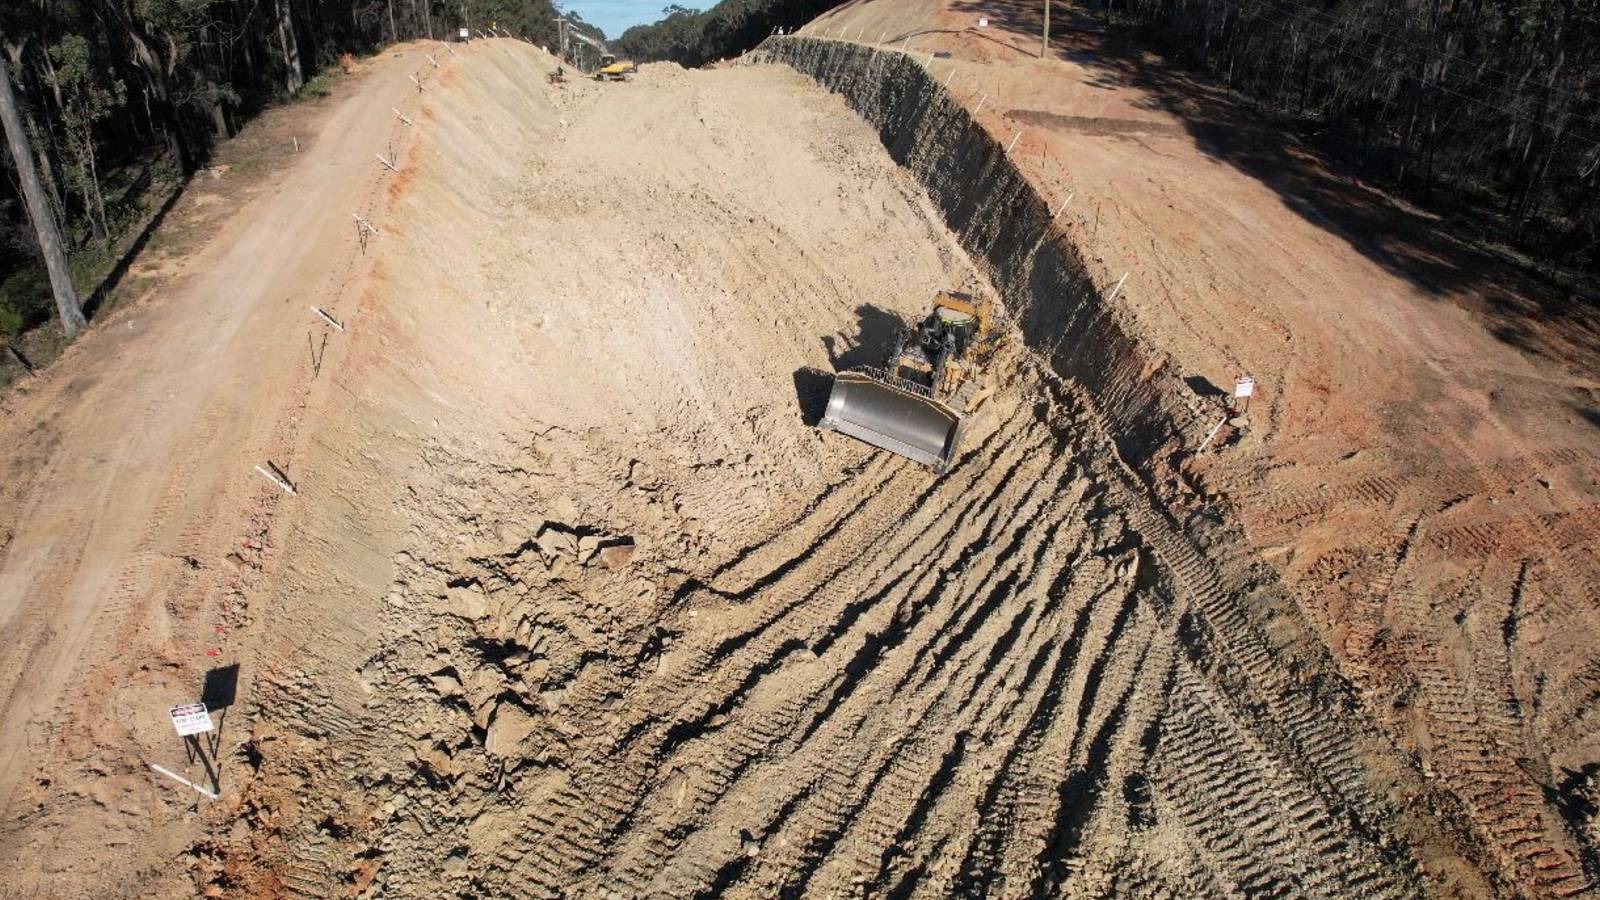 Image A large bulldozer cuts across a large earthworks cutting.